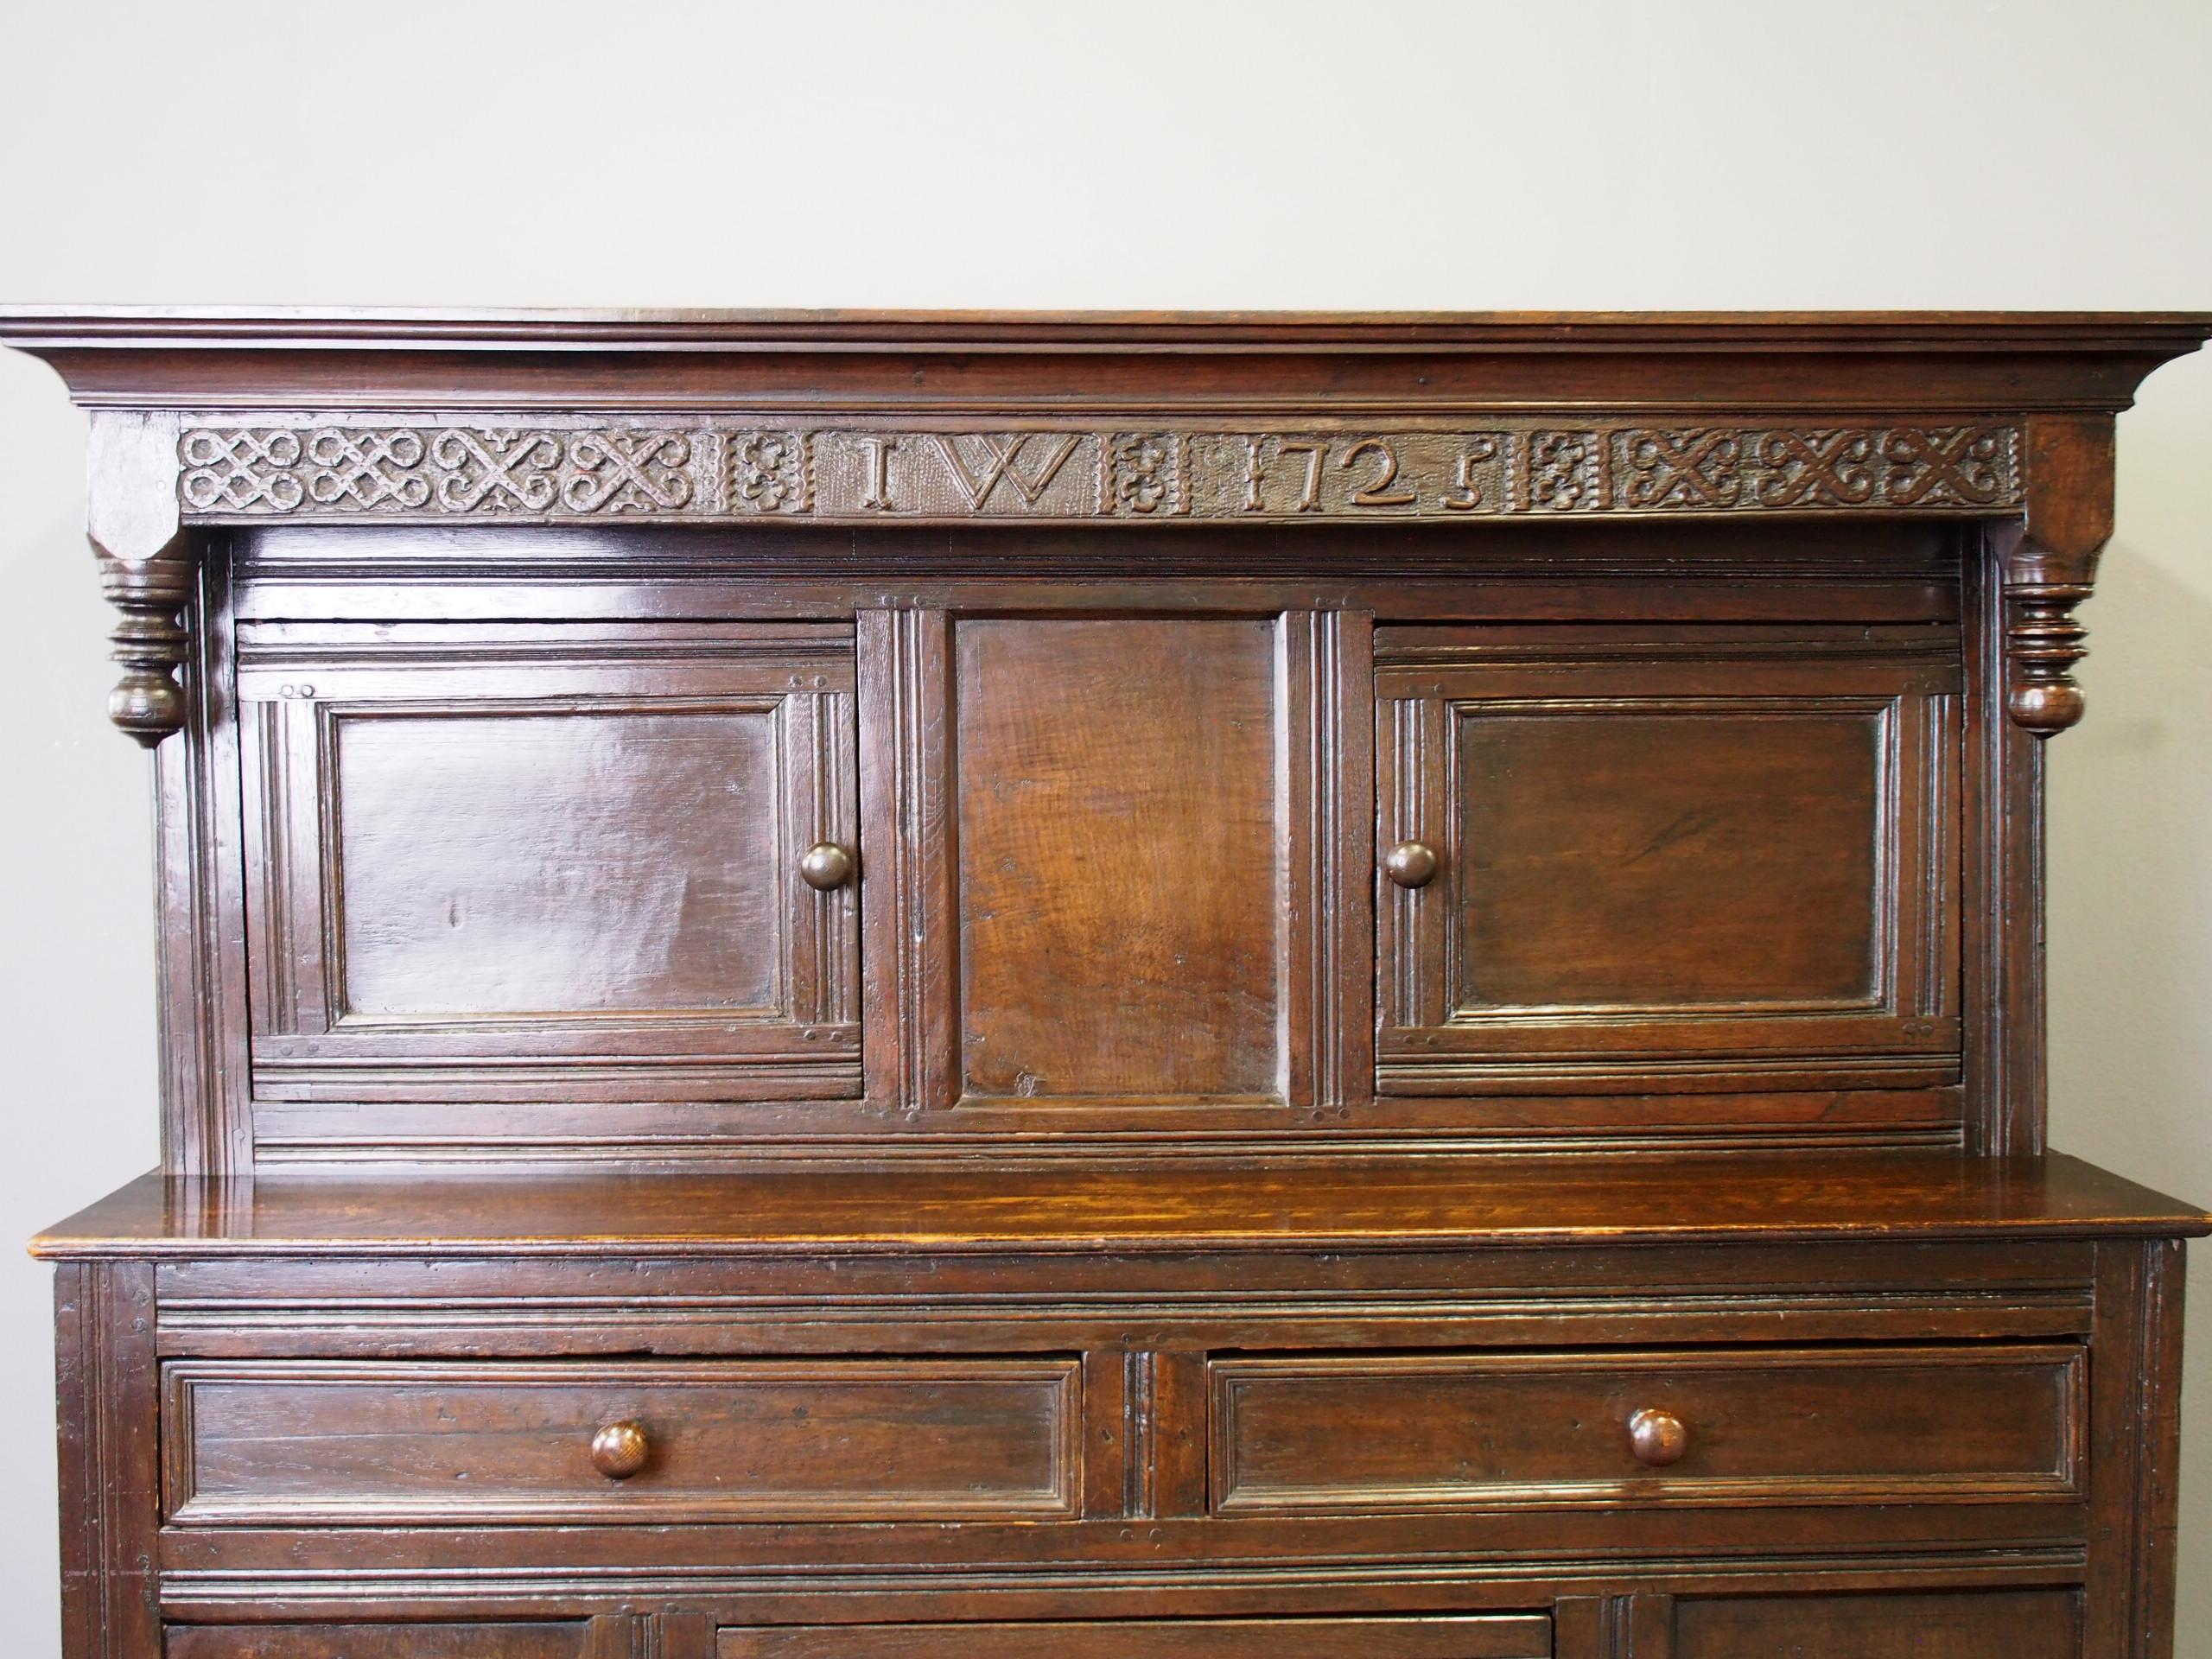 Dated 1725, Northern English carved oak cupboard. Initialled and dated, with moulded corners, carved finials and panelled doors opening to an uninterrupted interior. With blacksmith-made steel hinges, and the bottom section has 2 narrow drawers. The